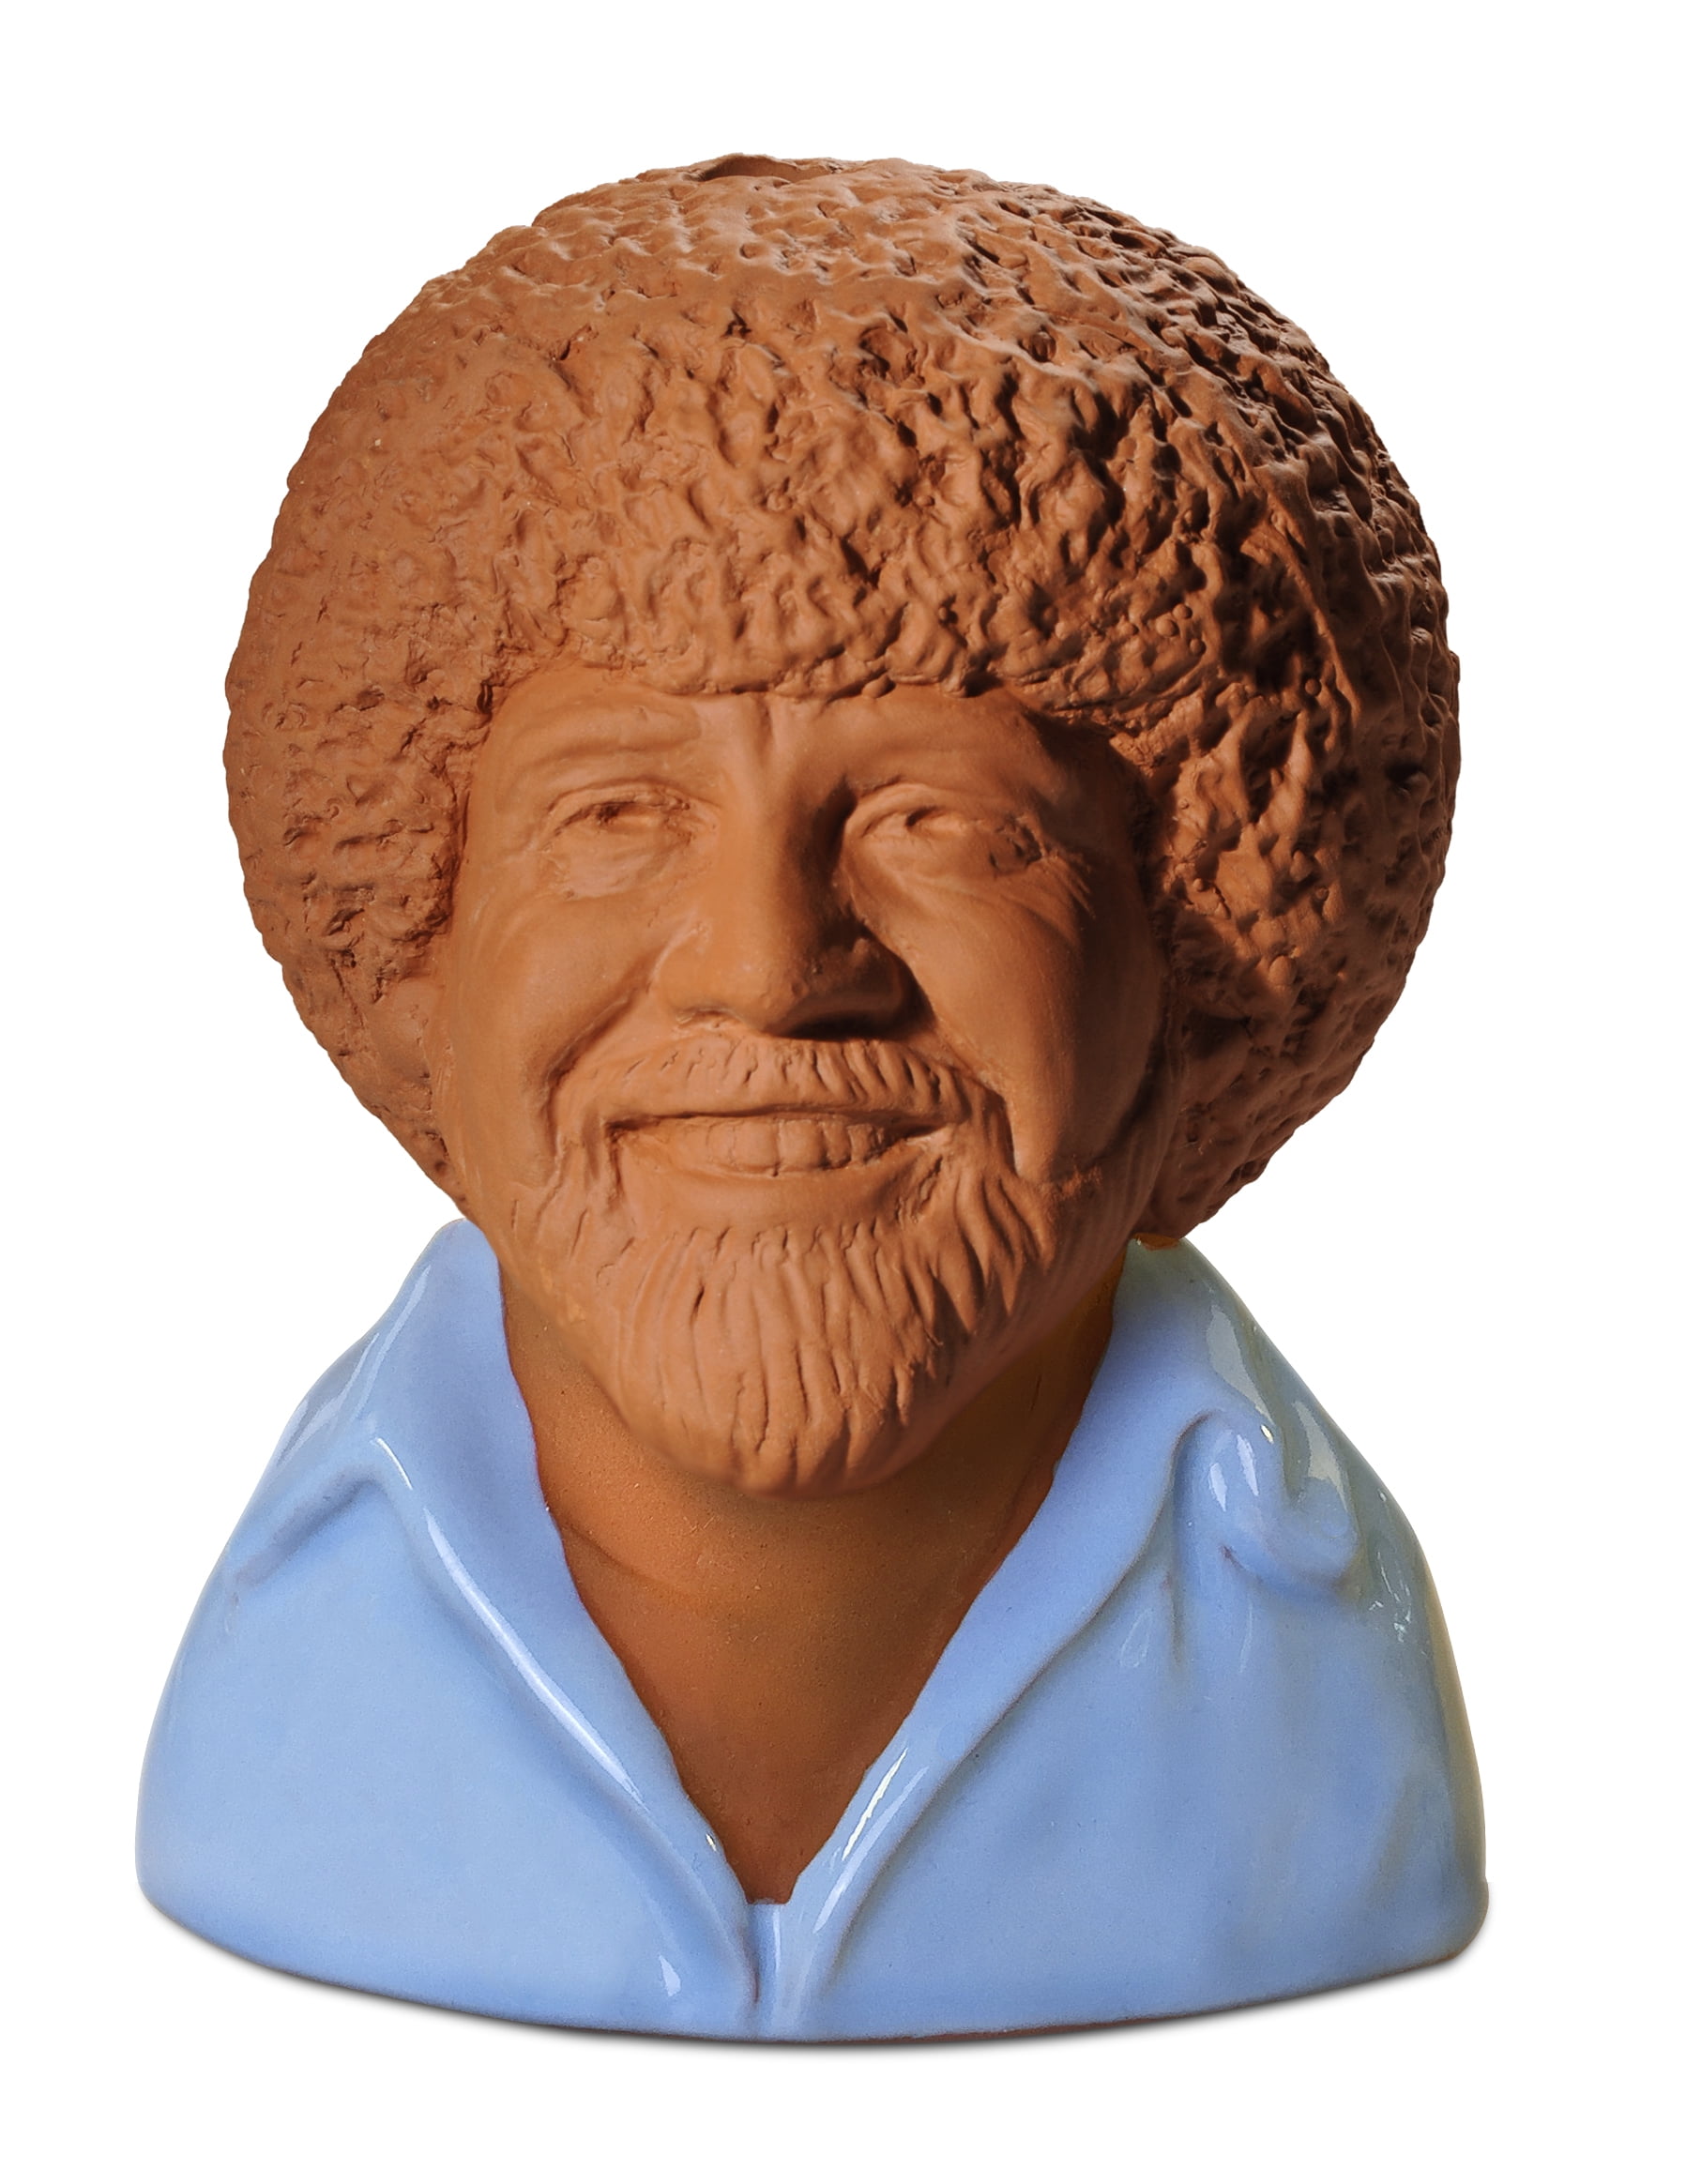 $6/mo - Finance Chia Pet Bob Ross with Seed Pack, Decorative